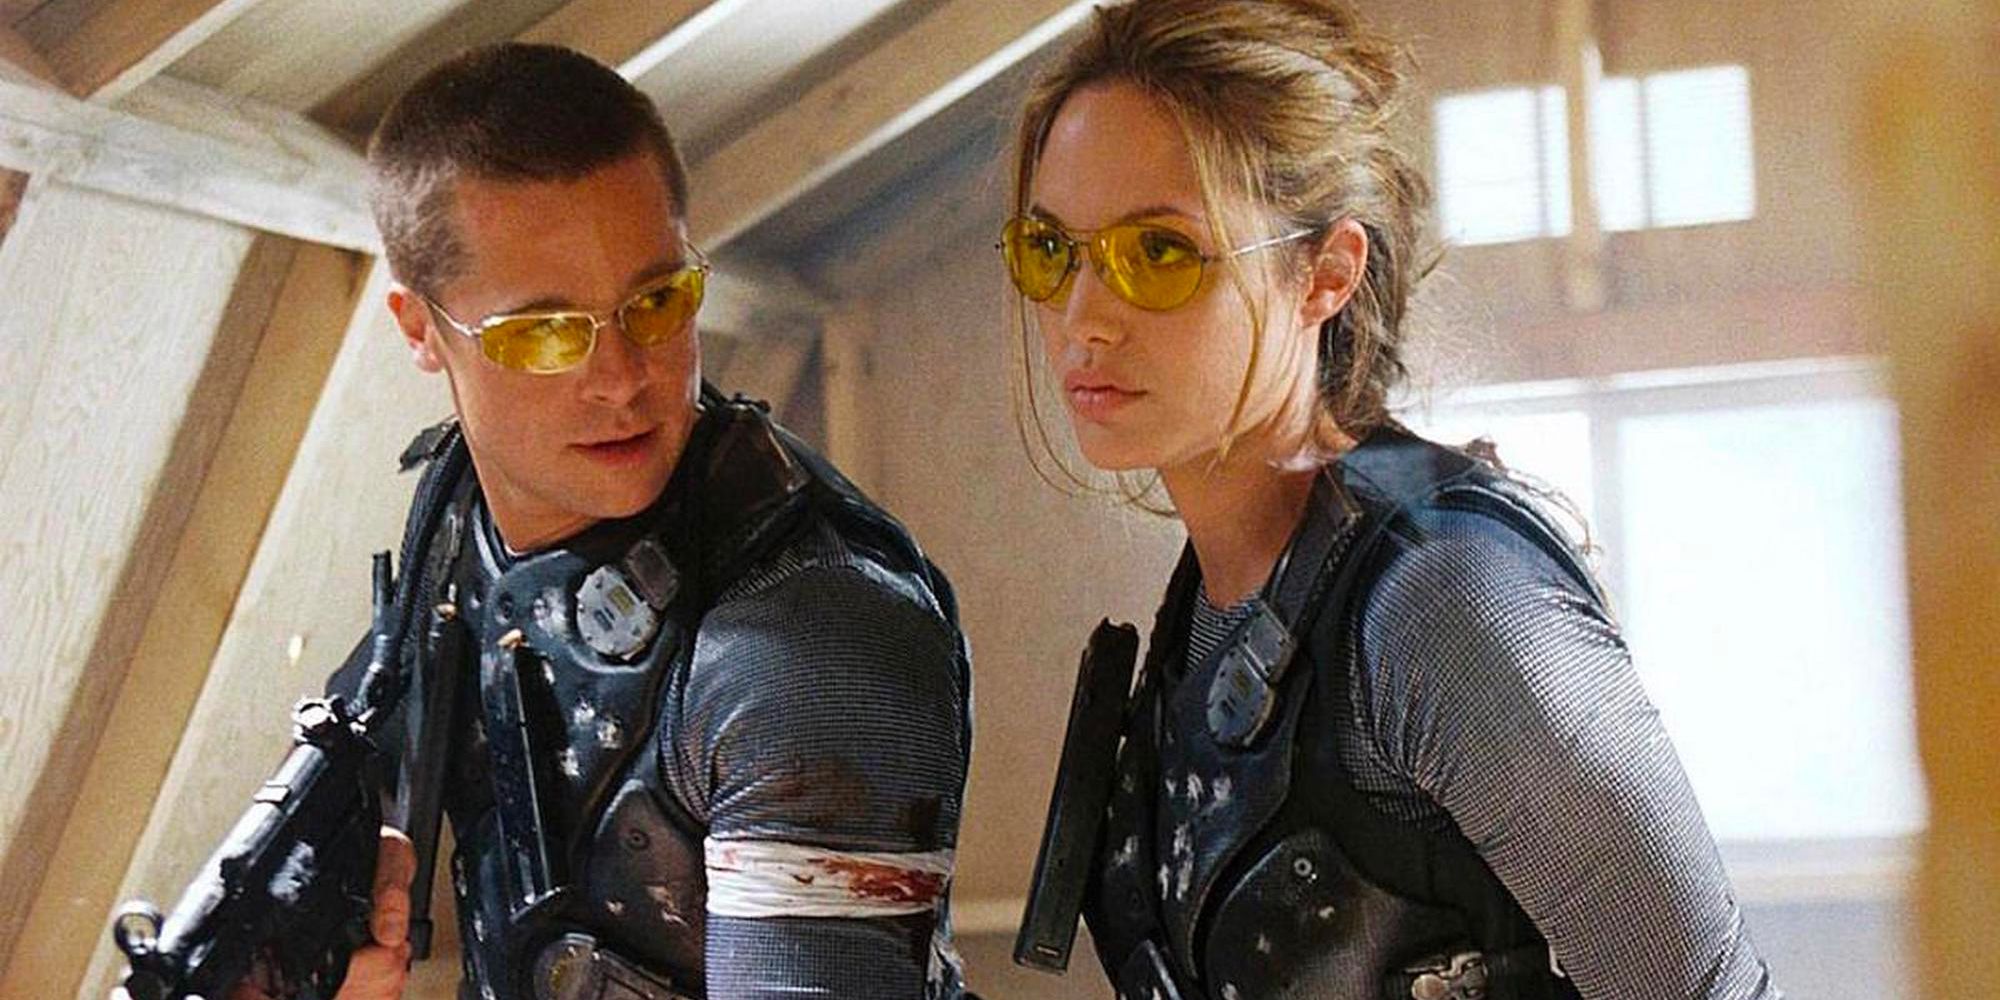 Jane and John on a mission in Mr. and Mrs. Smith.